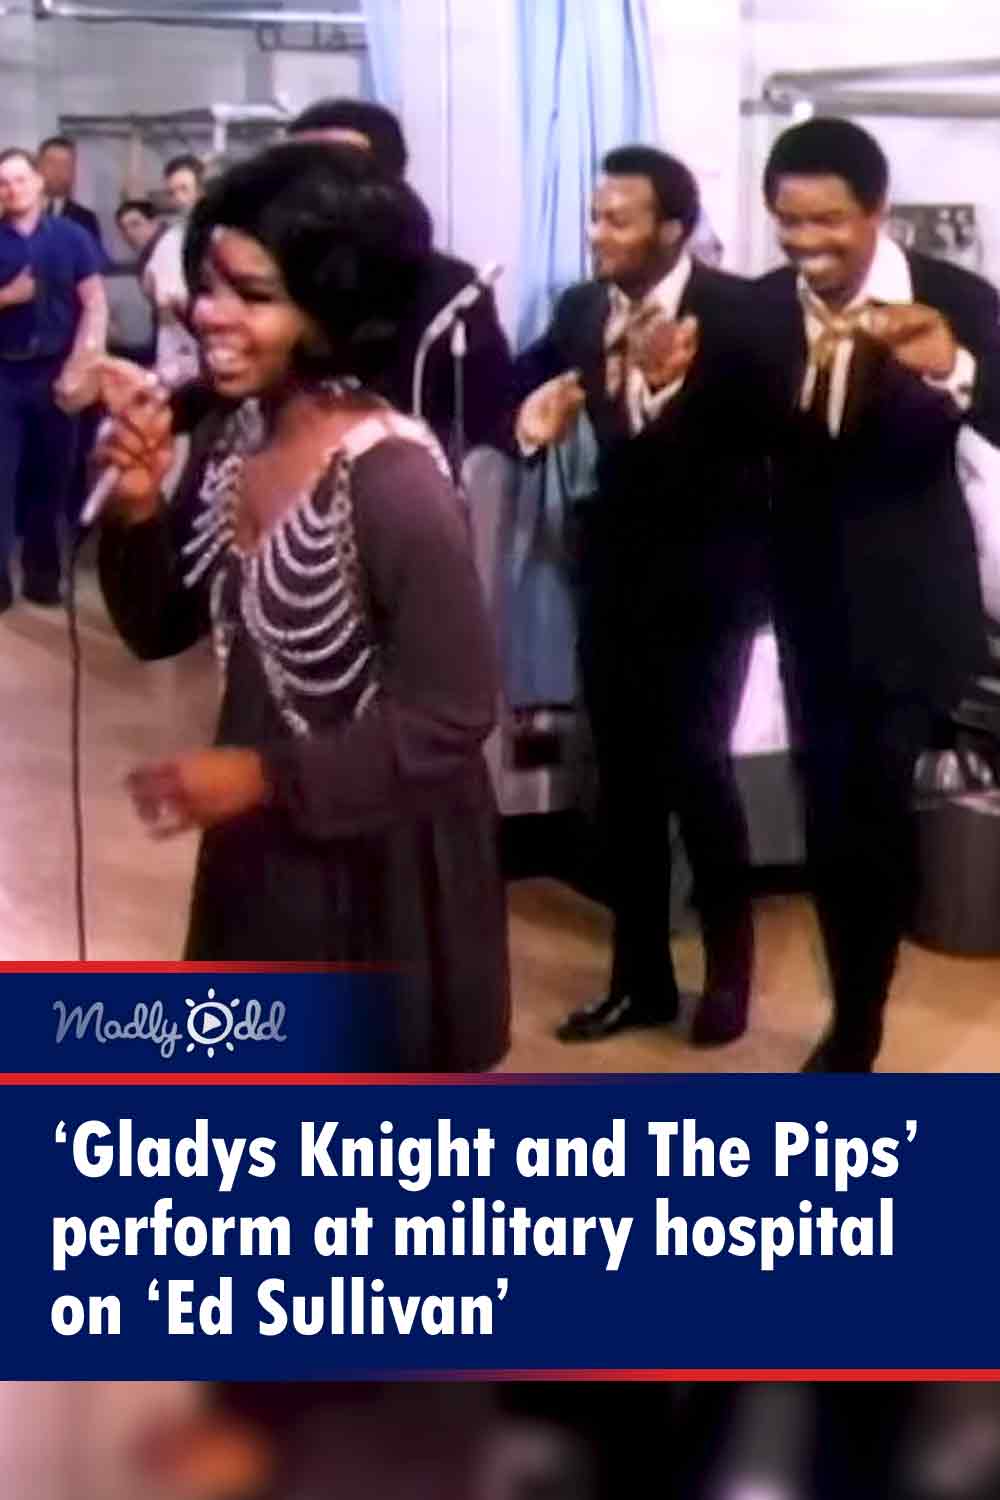 ‘Gladys Knight and The Pips’ perform at military hospital on ‘Ed Sullivan’